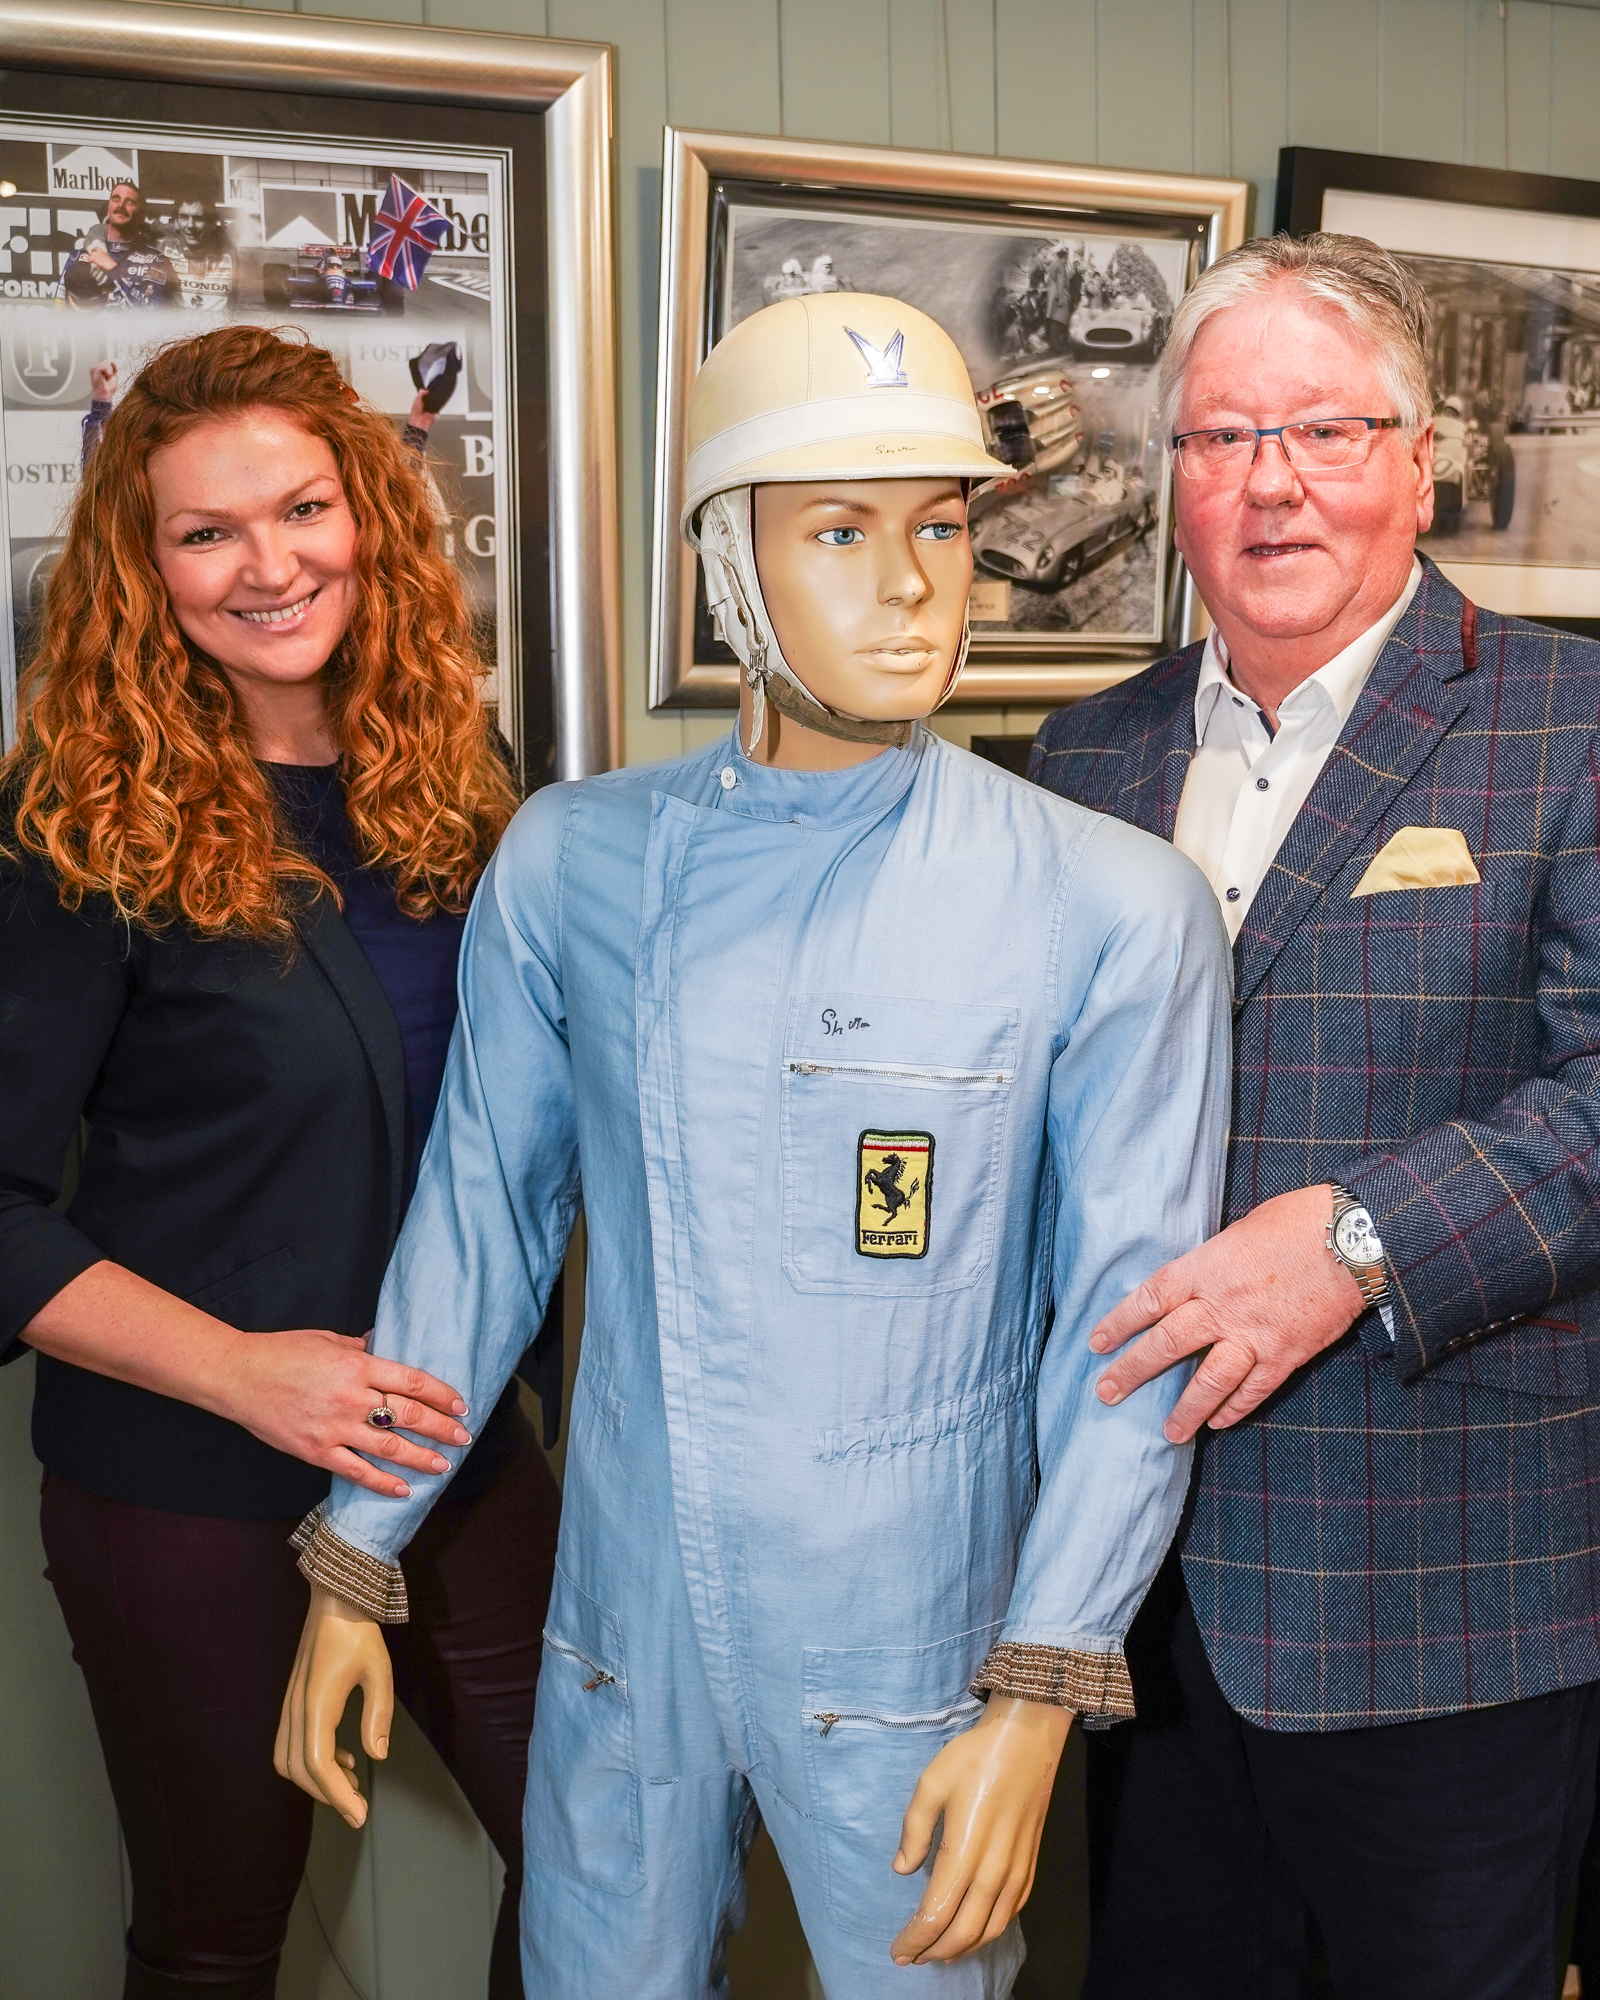 Auction house owner Irita Marriott with Rob Arnold, owner of the Sir Stirling Moss race suit